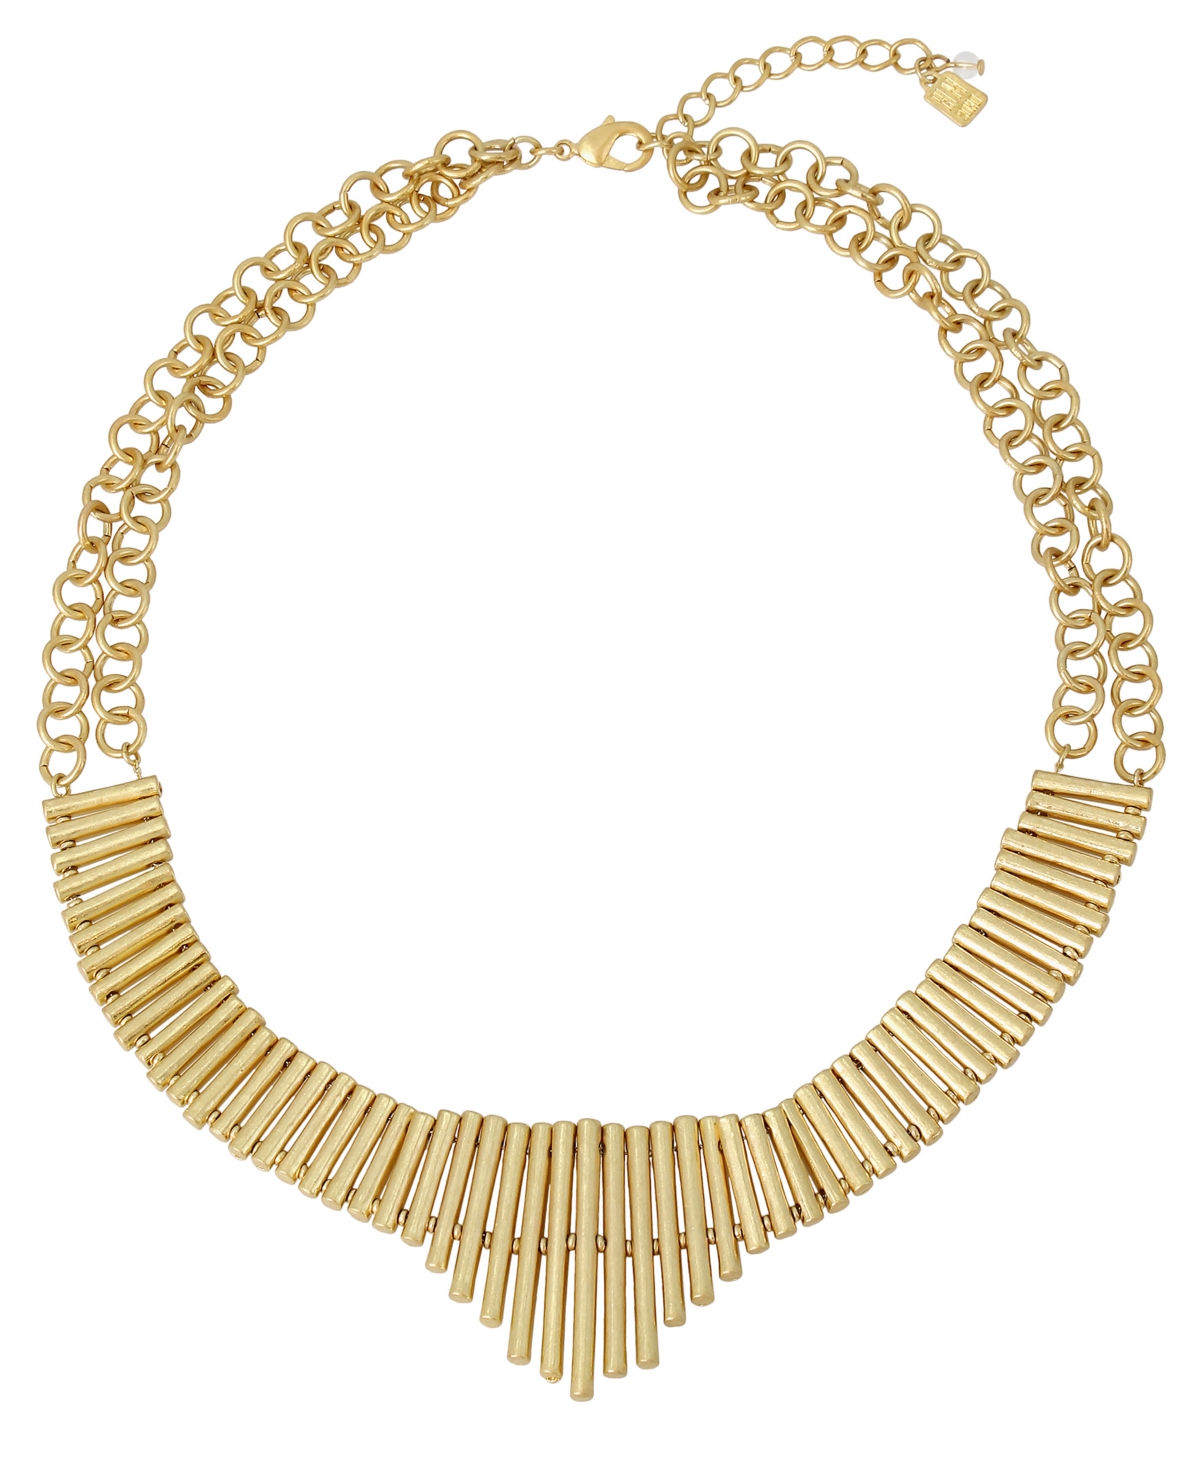 Bamboo Necklace - Gold-Tone